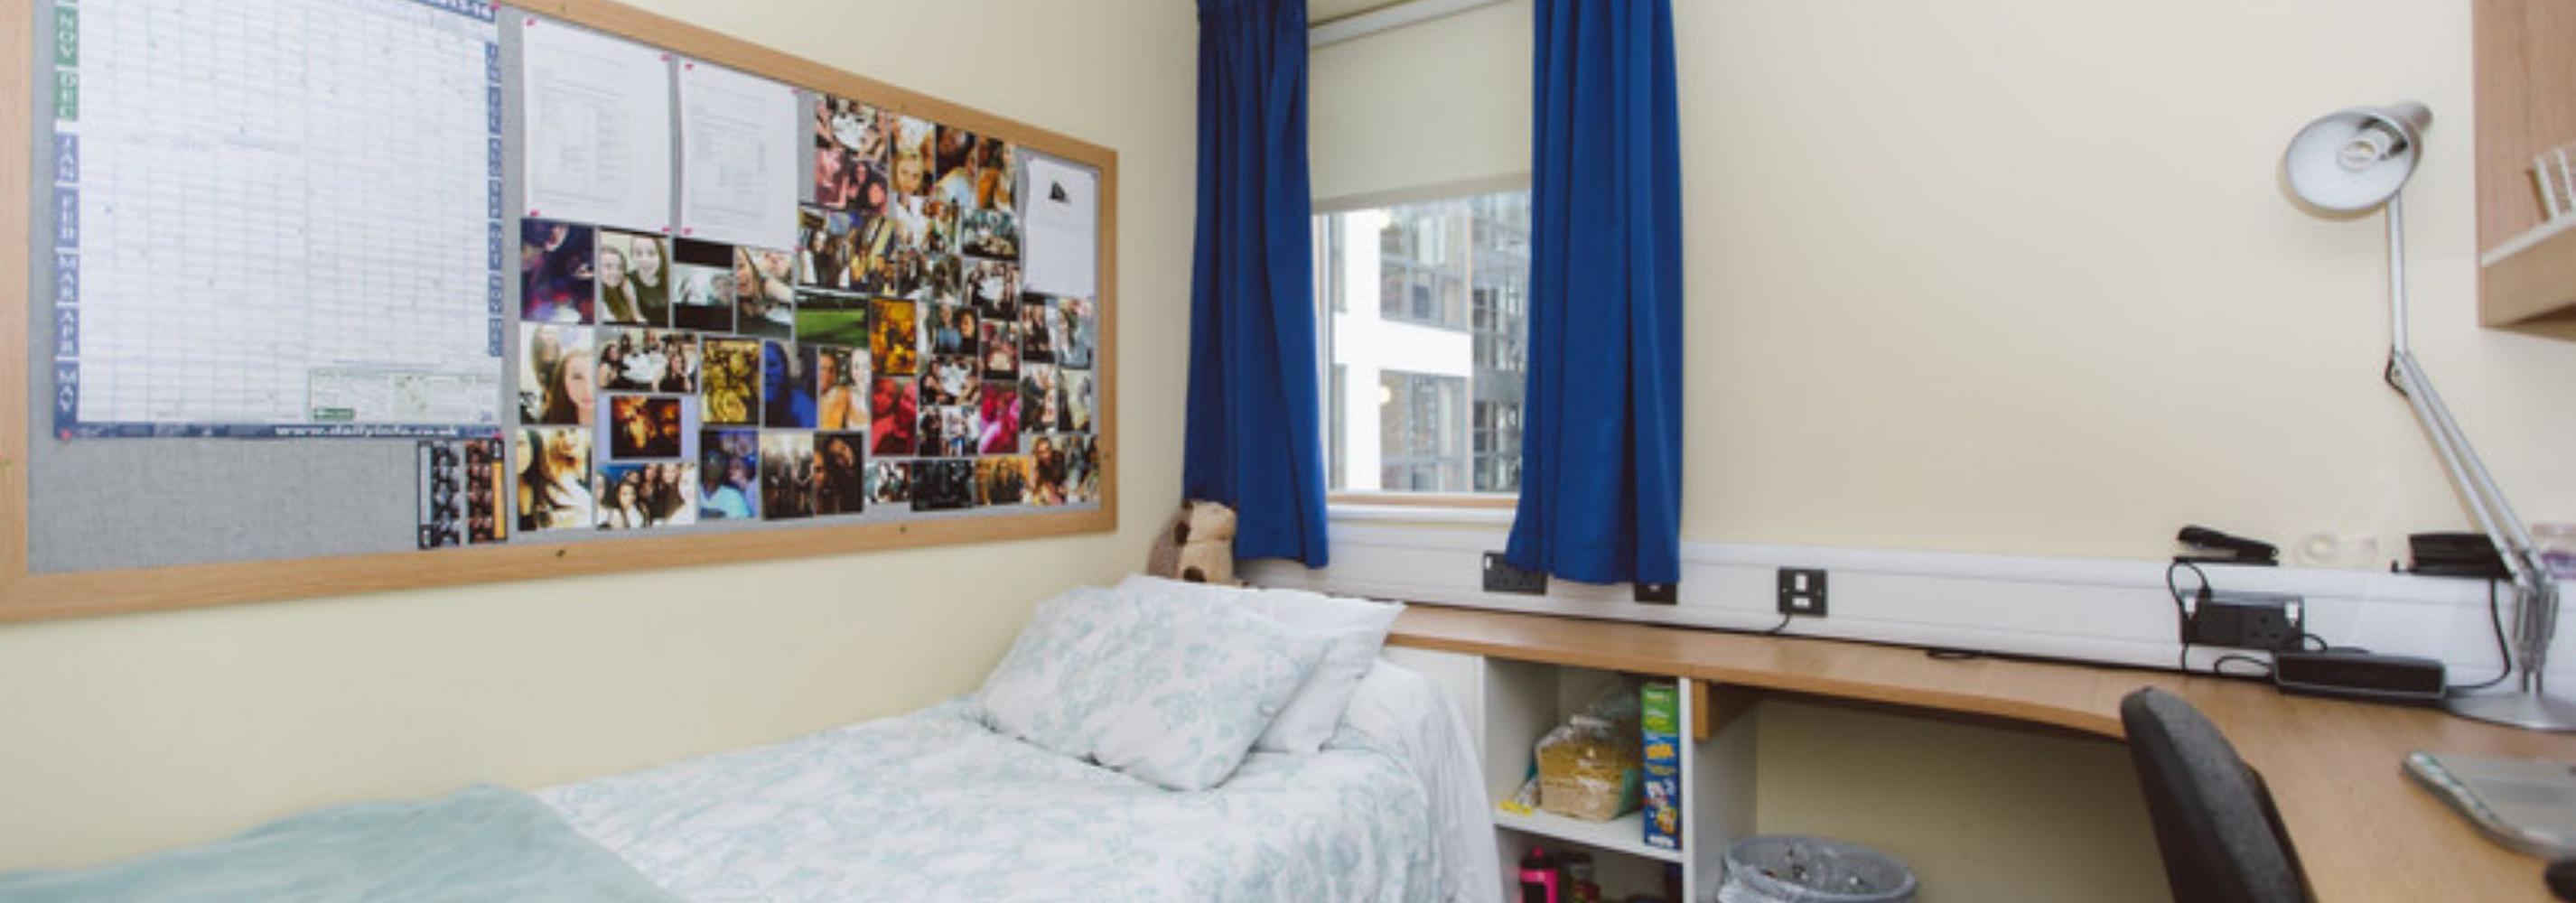 Single room with single bed to the left and large pin board along the side of the bed. Built in bed side table and desk. Window on the far wall with blue curtains.